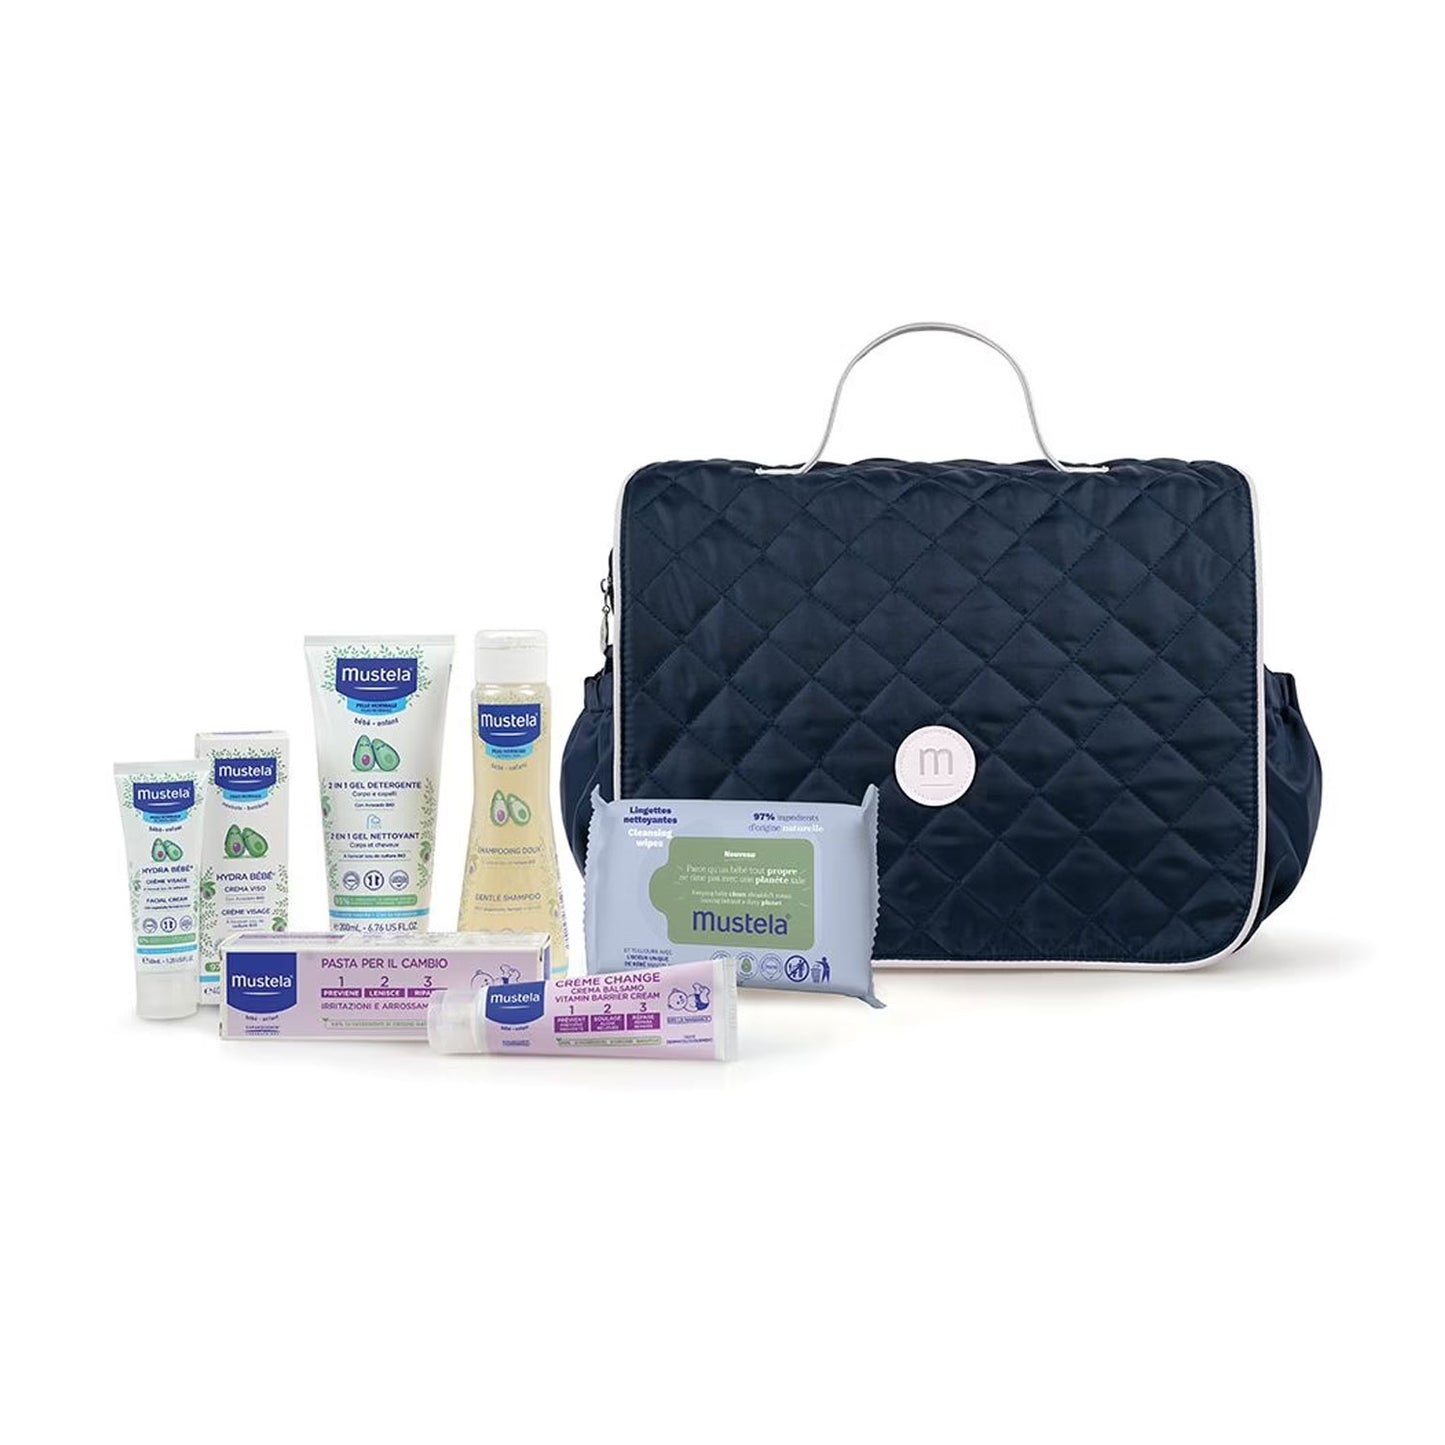 Mustela - Backpack bag with products